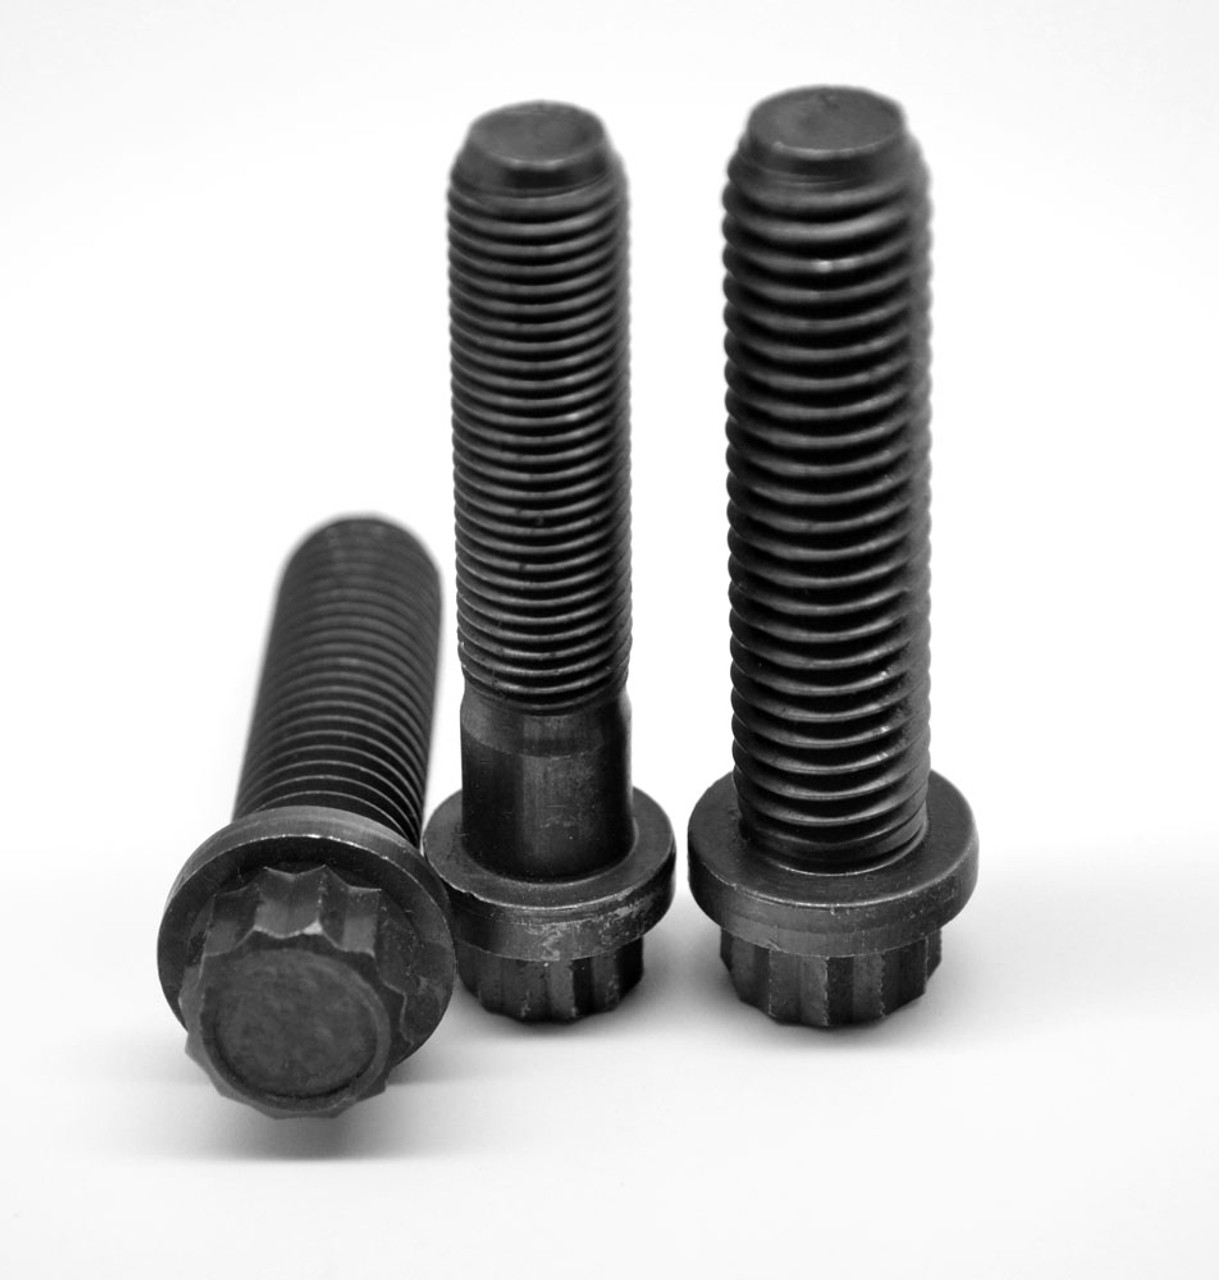 7/16-14 x 4 Coarse Thread 12-Point Flange Screw Alloy Steel Thermal Black Oxide